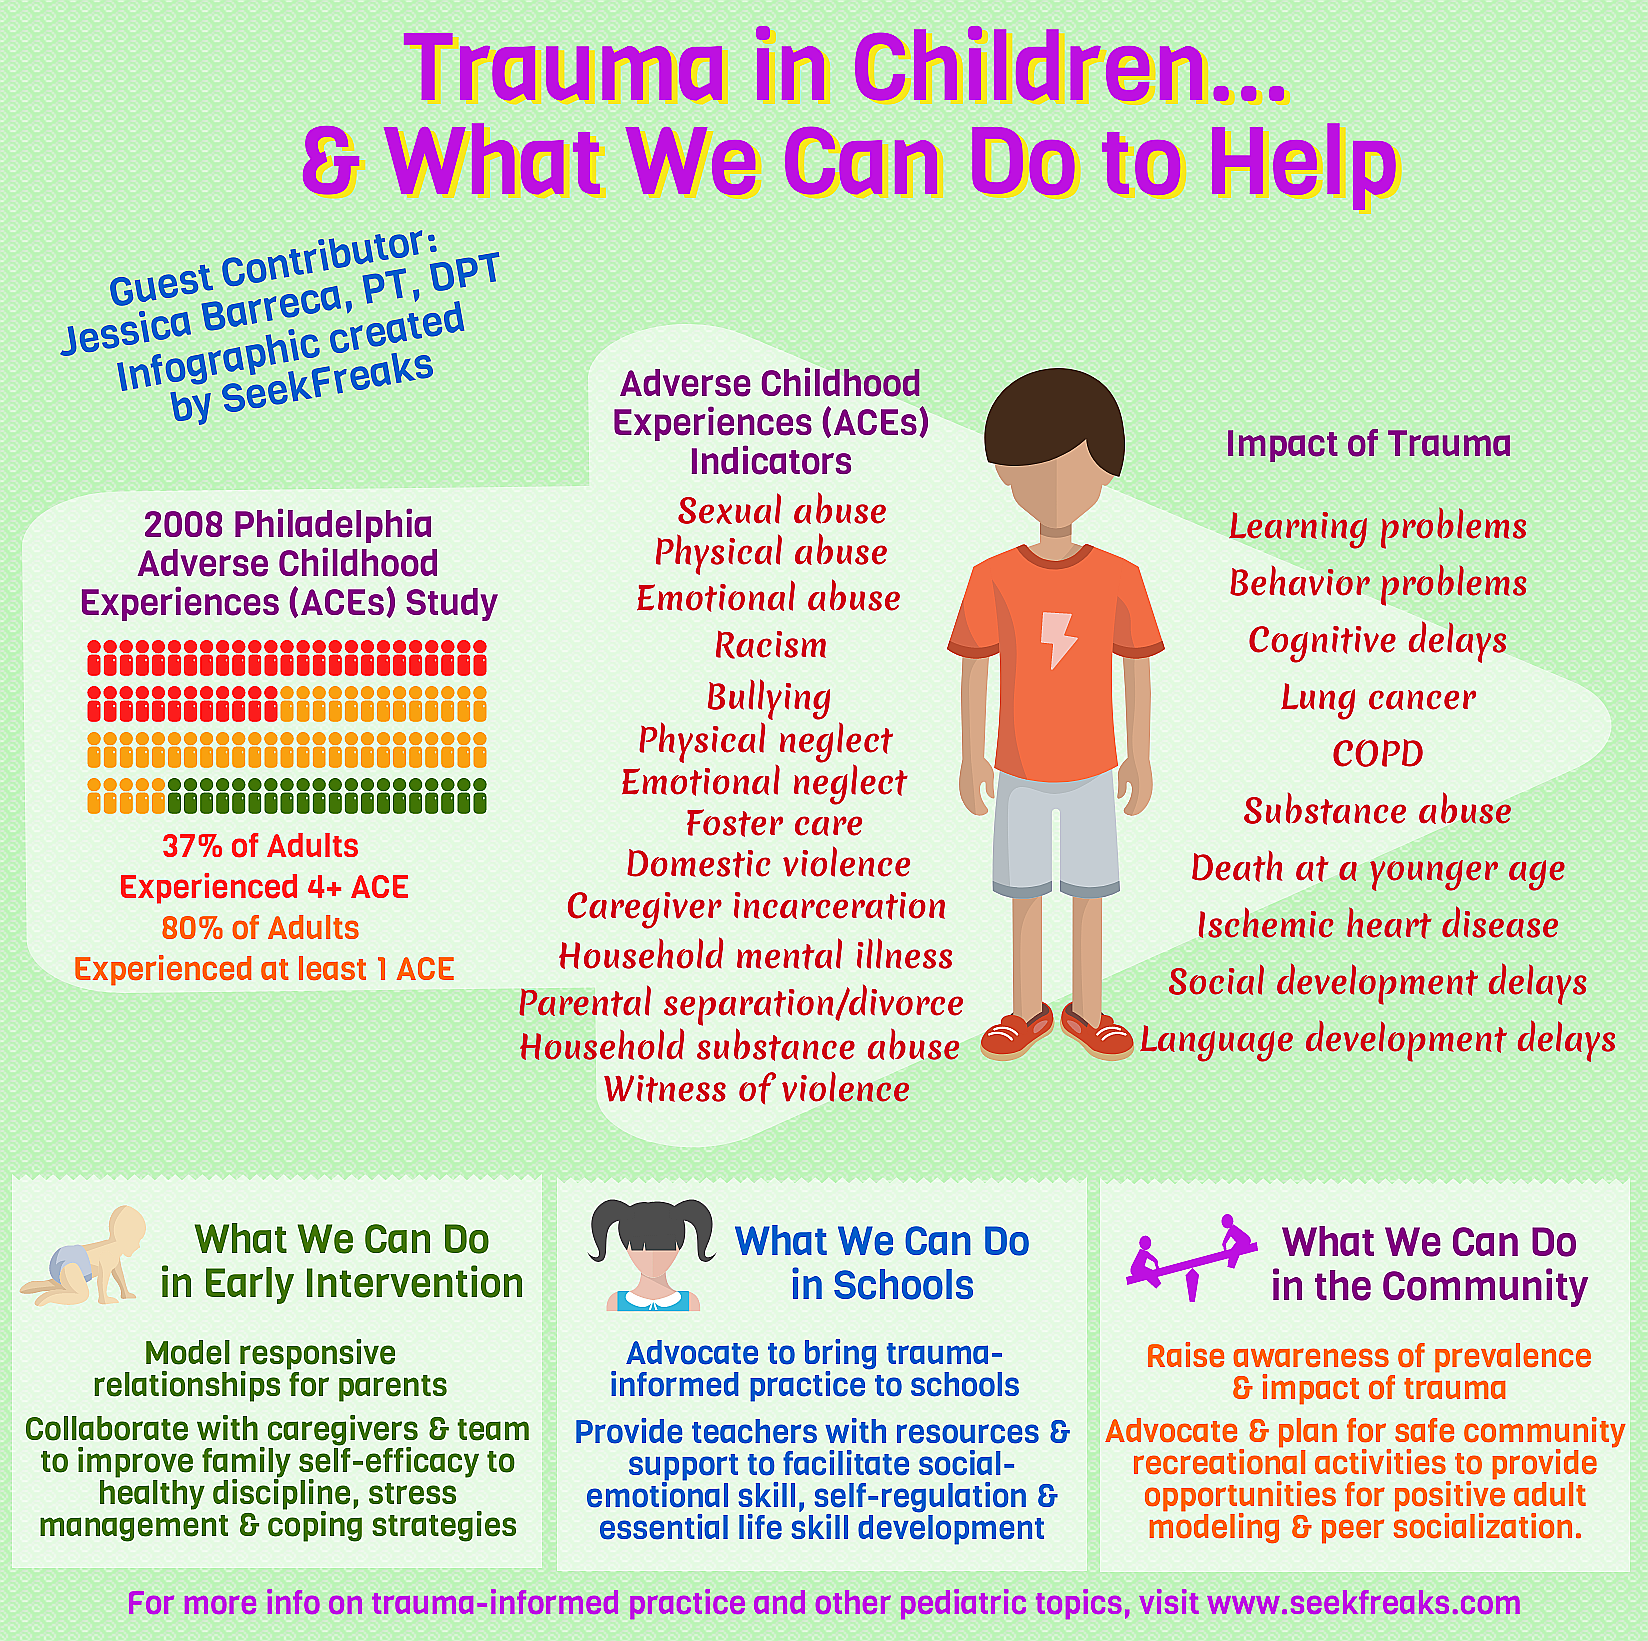 signs of trauma in babies